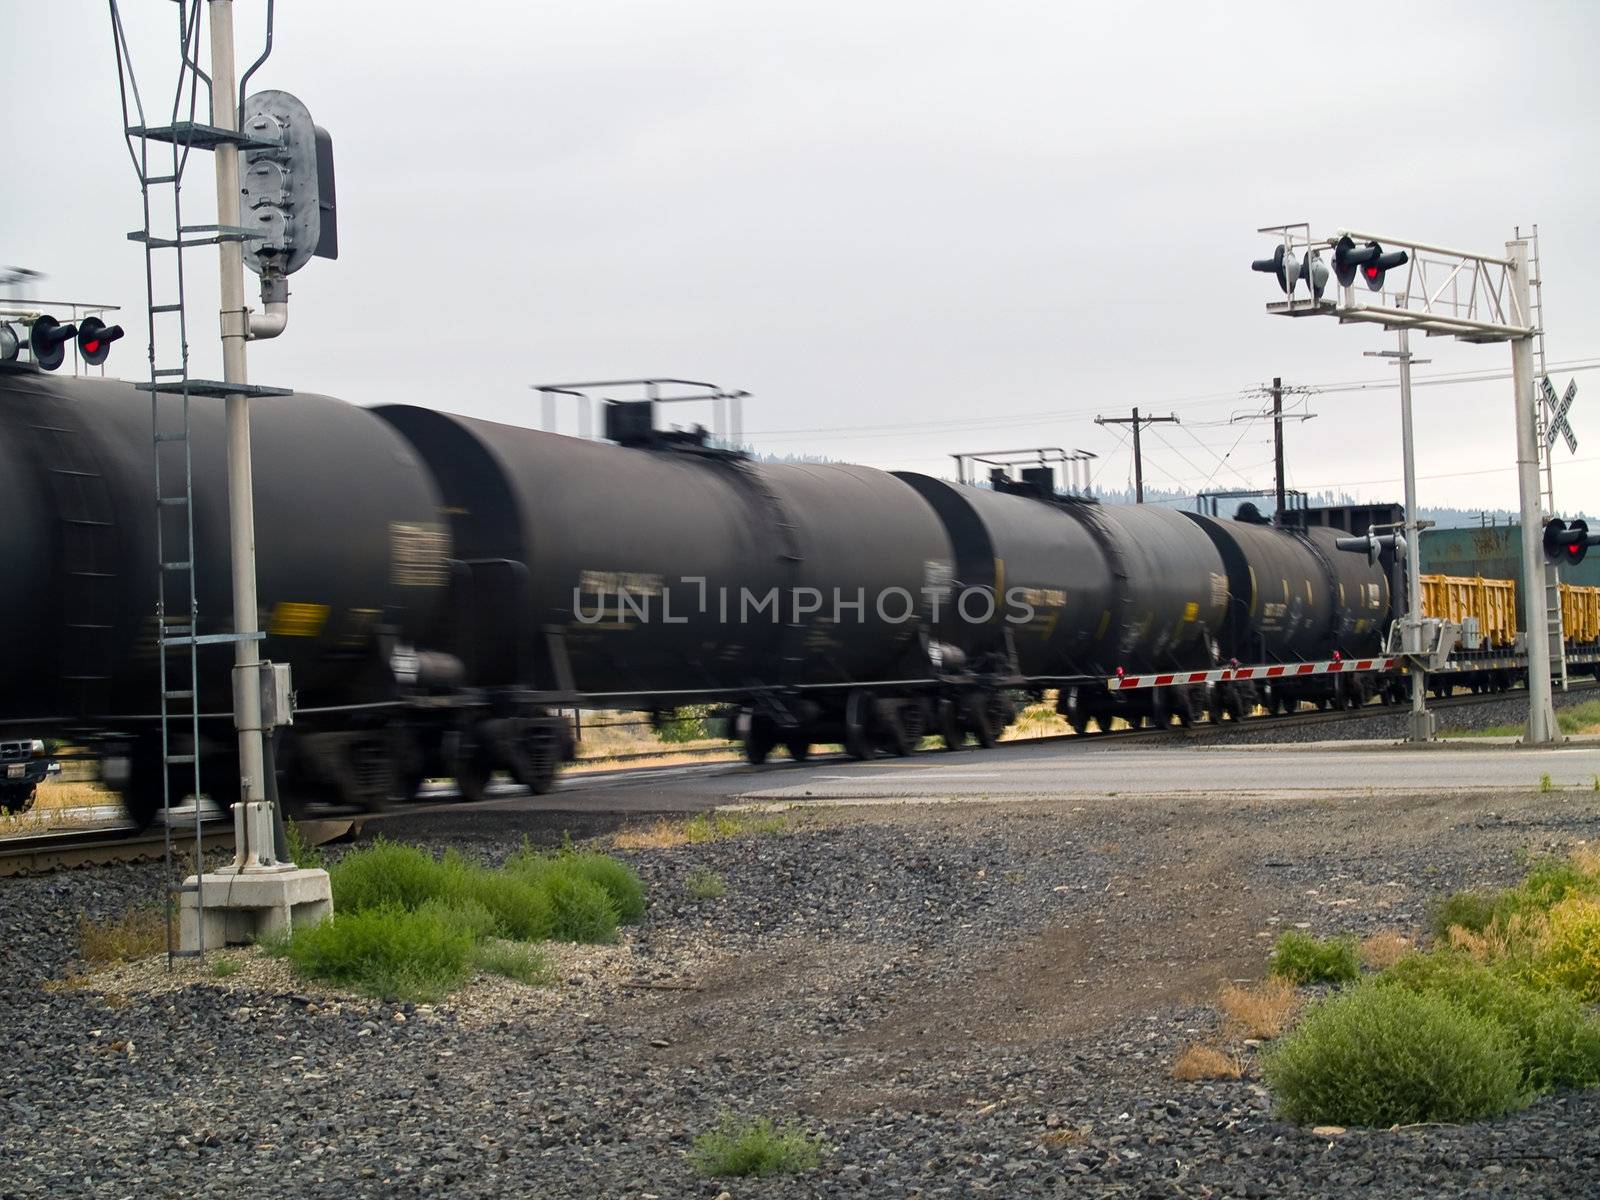 Blurred moving cargo trains from a train road crossing